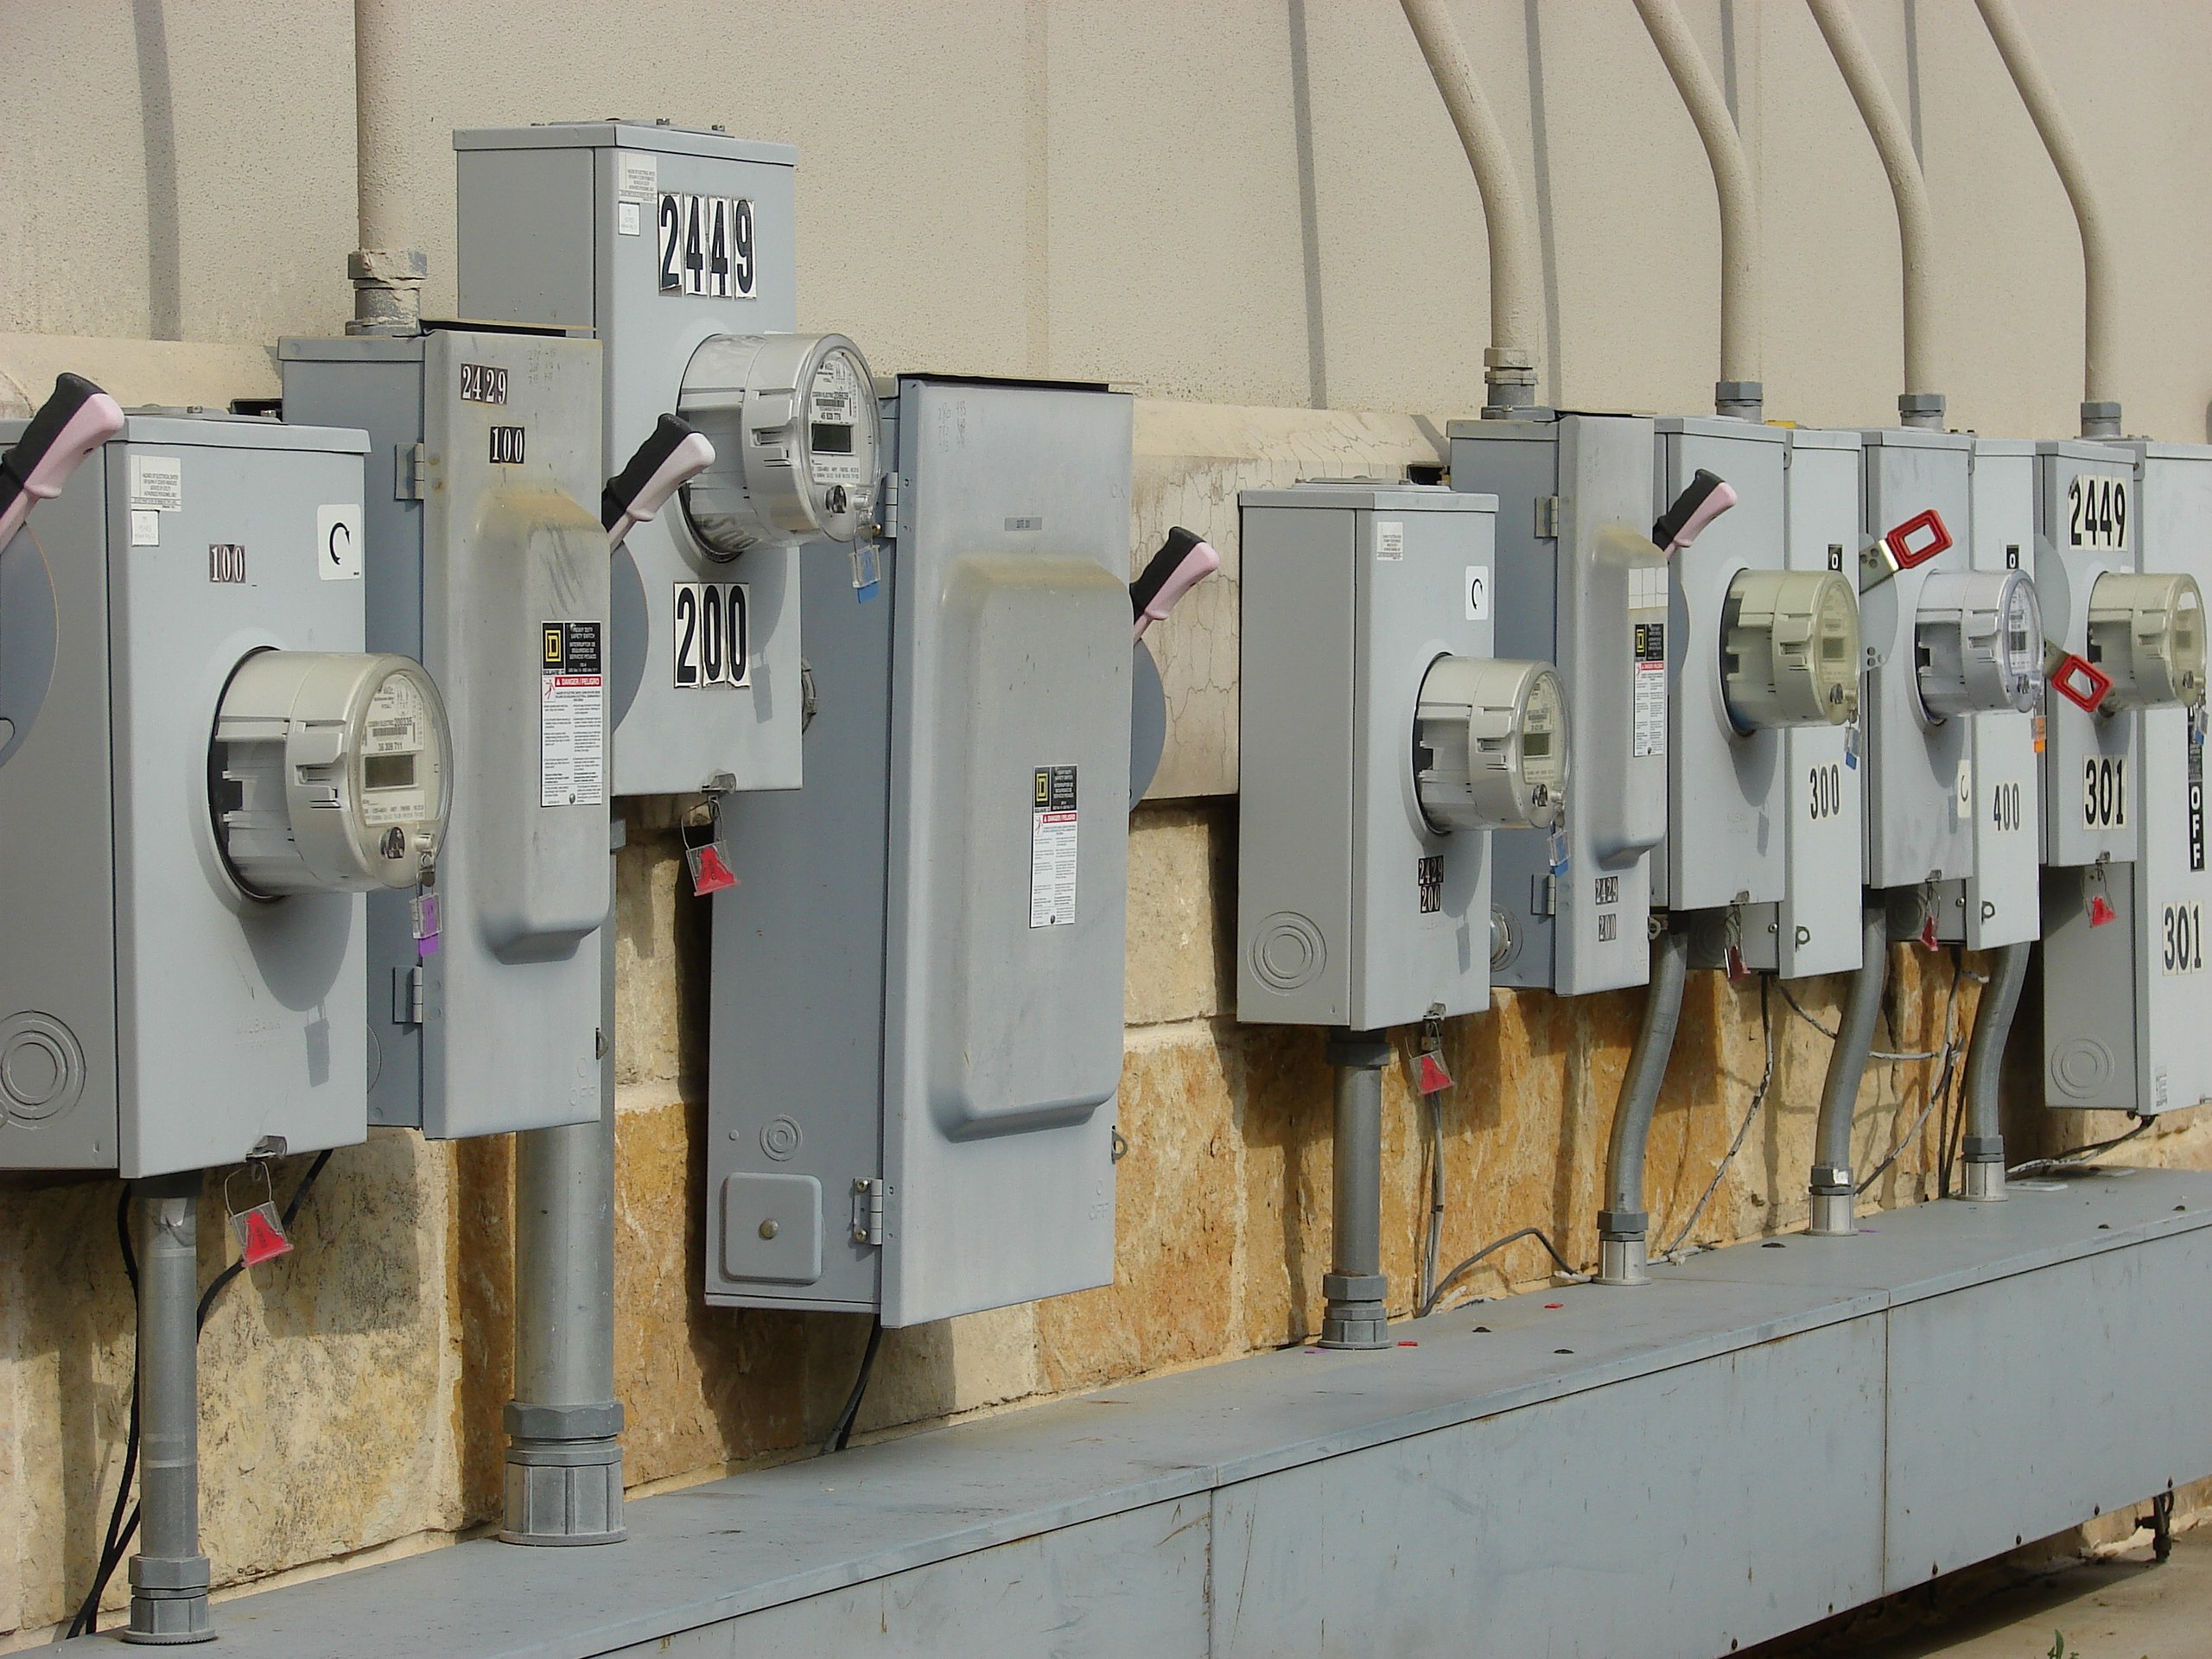 A wall of electrical boxes of different sizes and shapes.